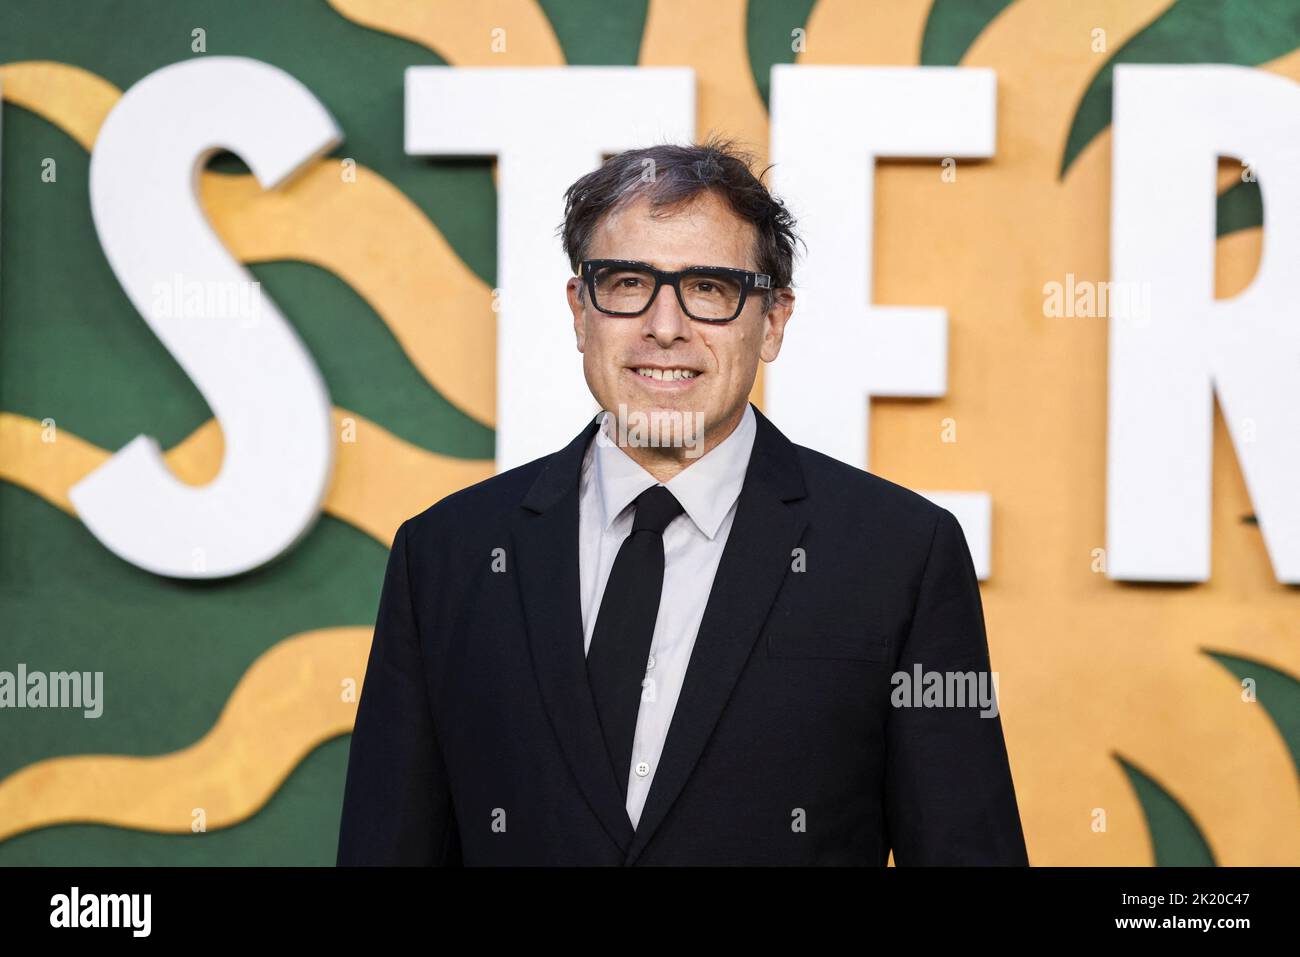 Director David O. Russell attends the European premiere of the film 'Amsterdam', in London, Britain September 21, 2022. REUTERS/Tom Nicholson Stock Photo